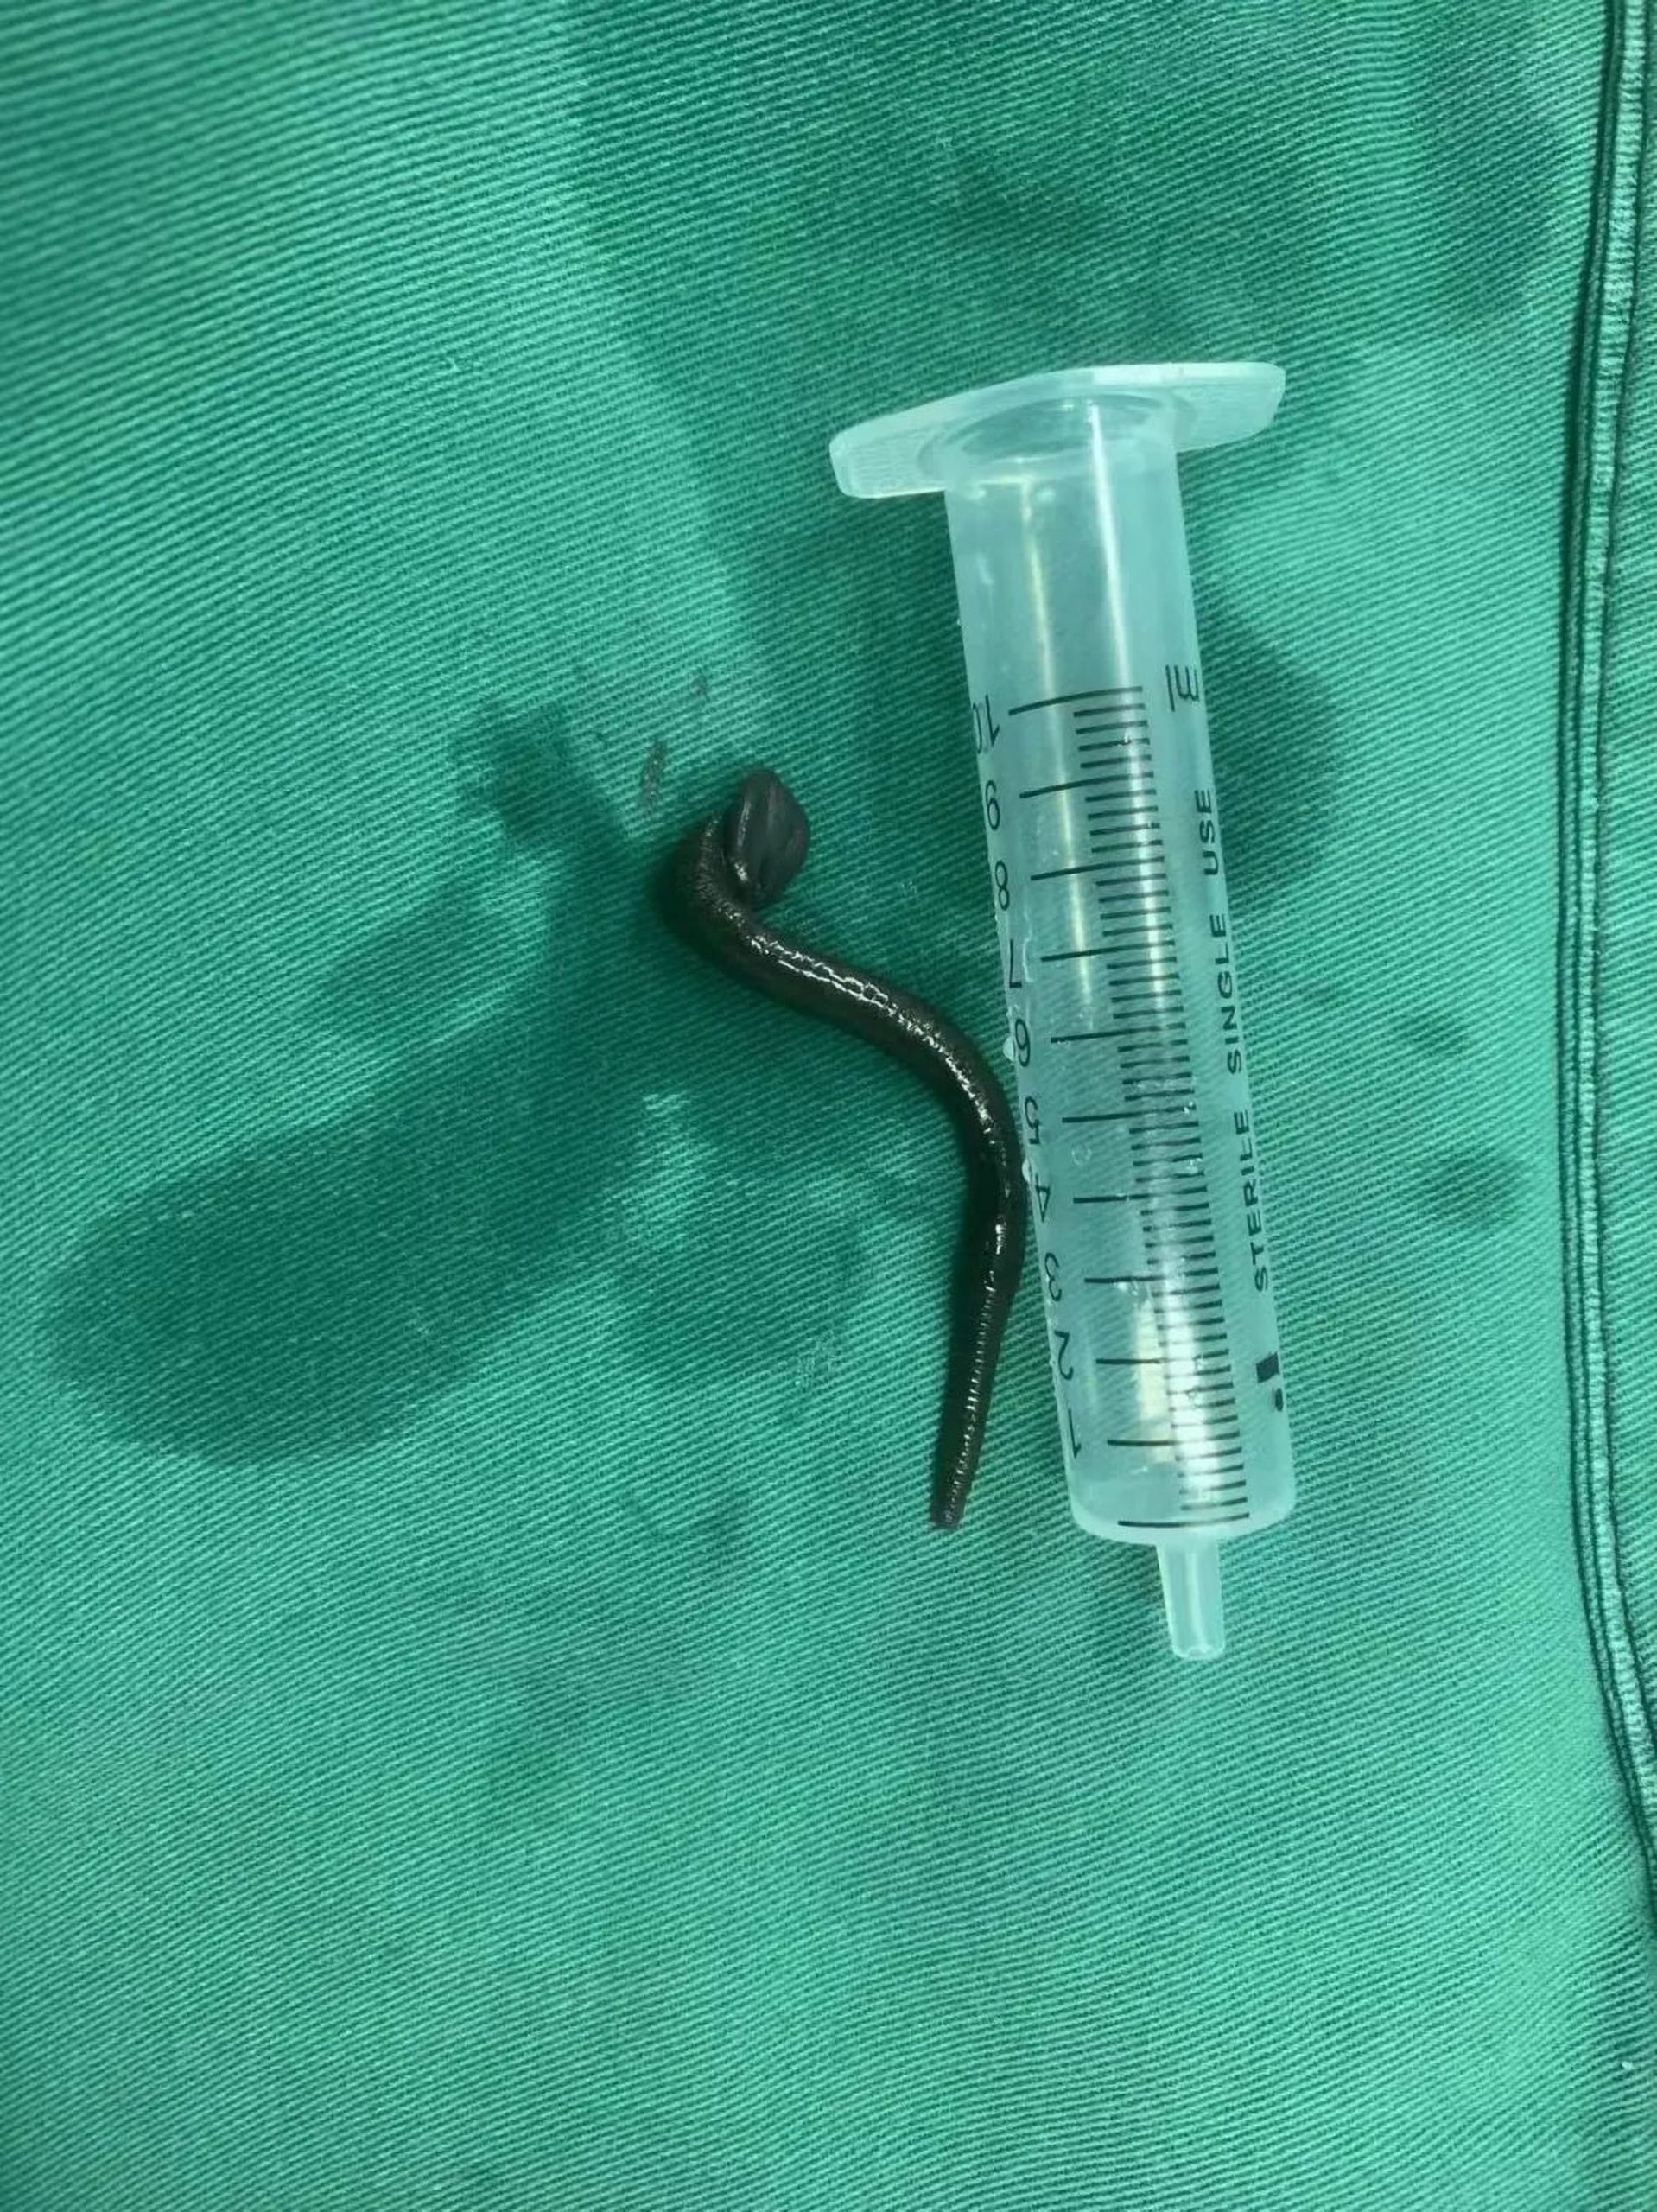 Read more about the article LEECH AWAY: Girl, 5, Has 15-Centimetre Leech Removed From Her Windpipe